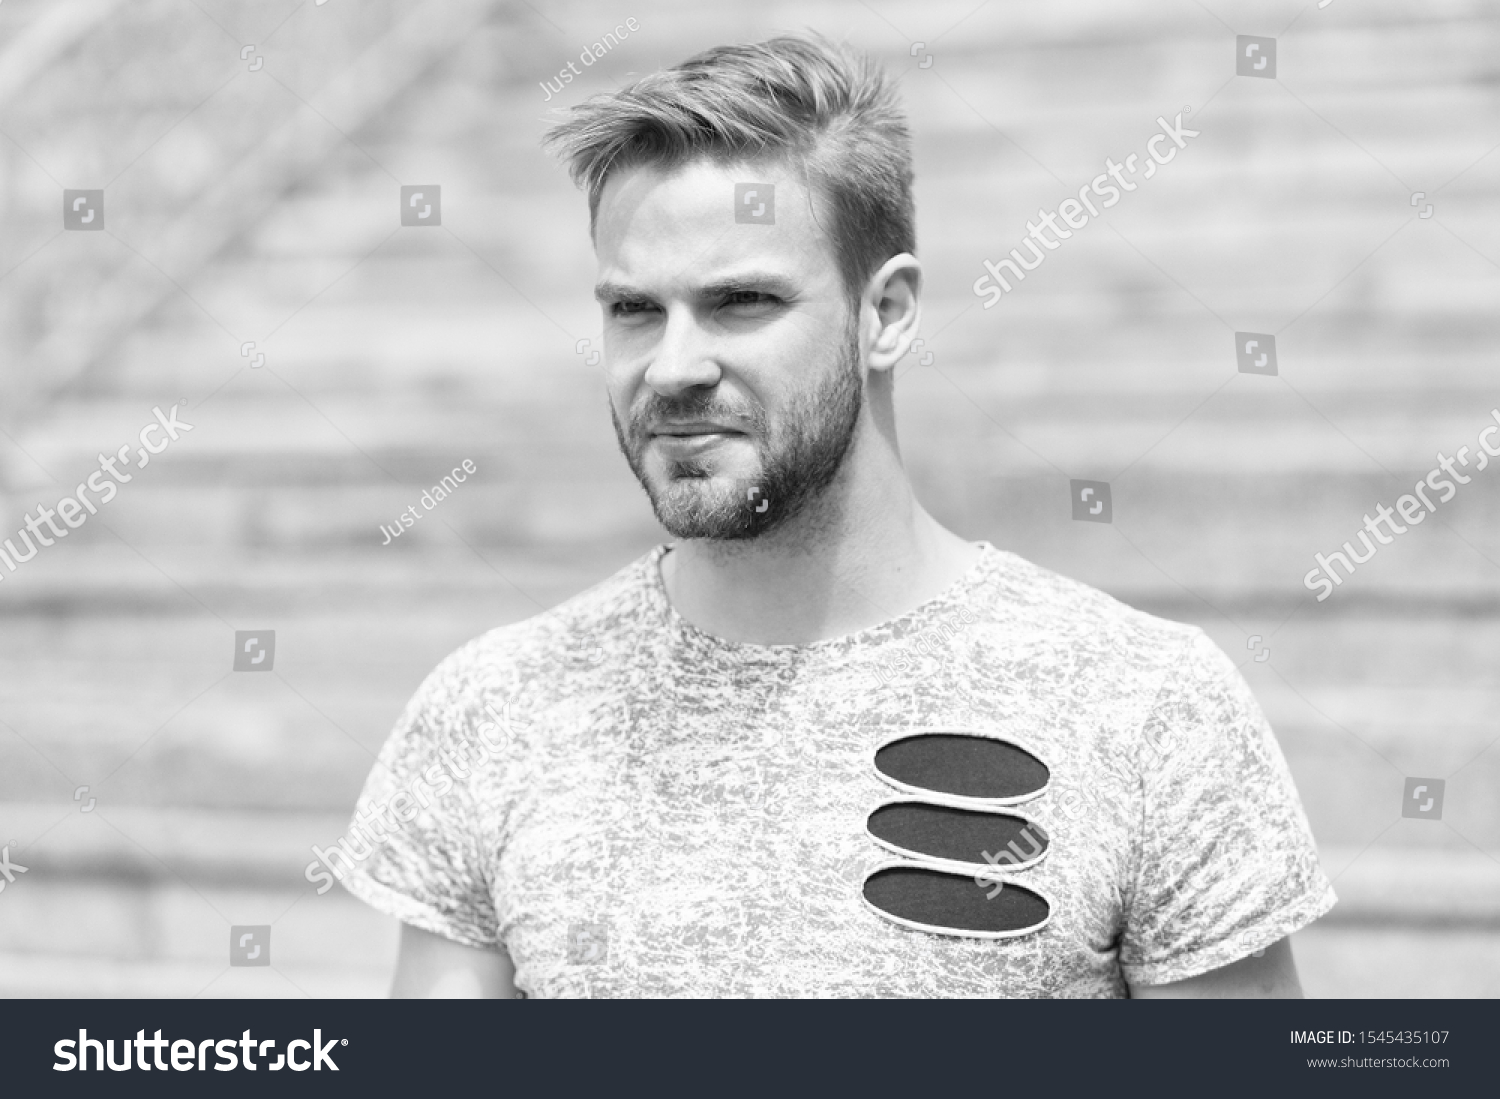 Handsome and attractive. Handsome man in summer style on sunny day. Caucasian guy with sexy beard on unshaven handsome face and stylish blond hair on urban outdoor. Casual and handsome. #1545435107